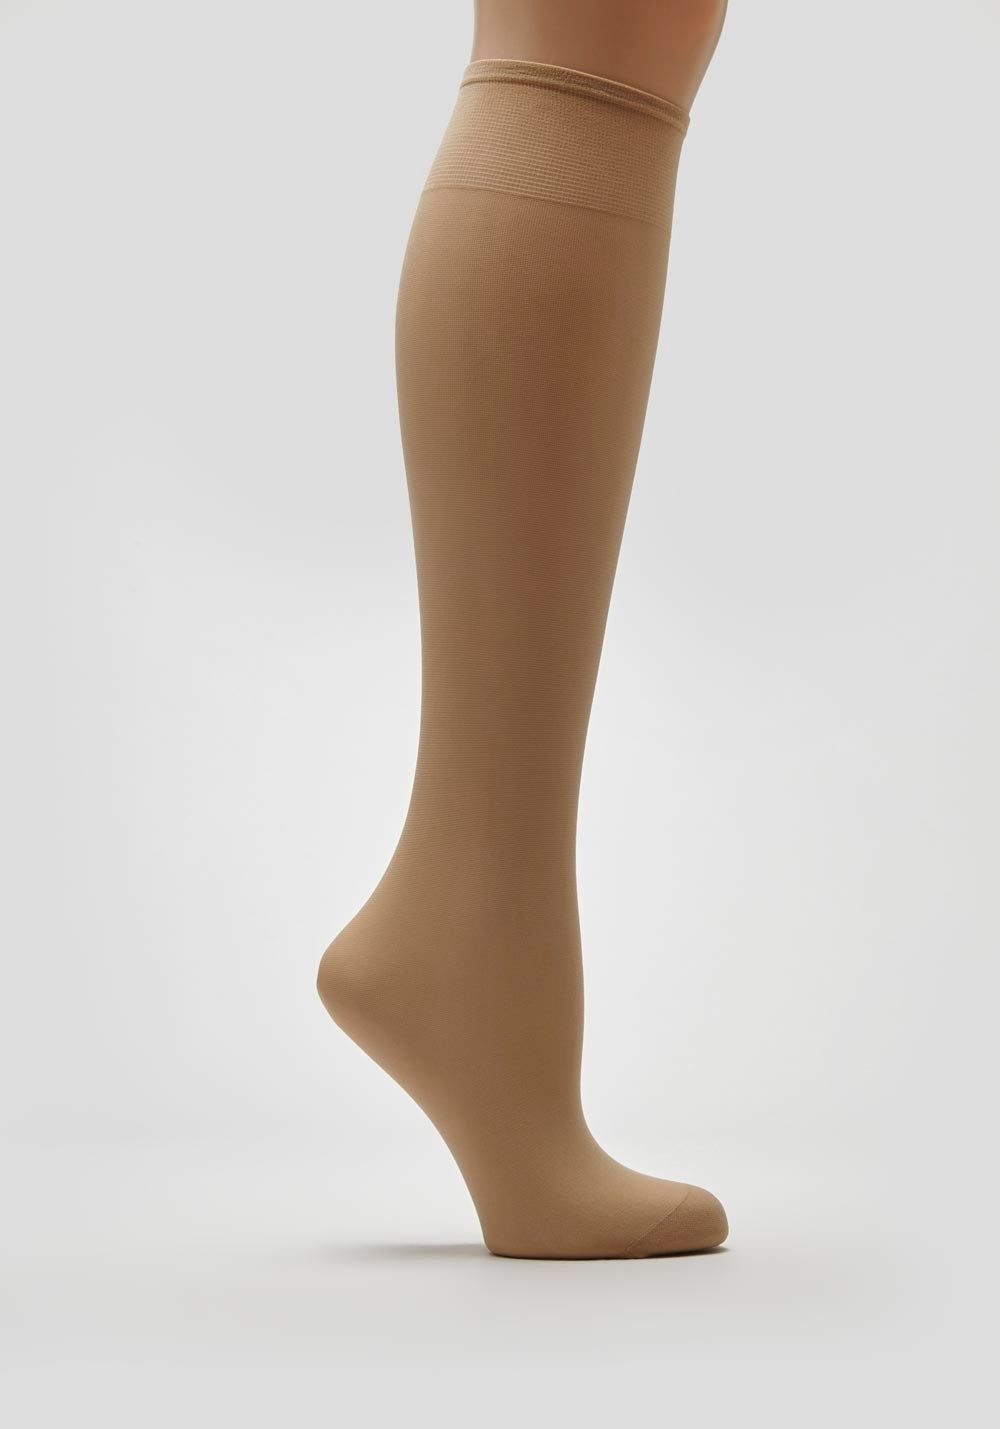 Buy Bamboo Nude 15 Denier Ankle Tights 5 Pack One Size, Tights